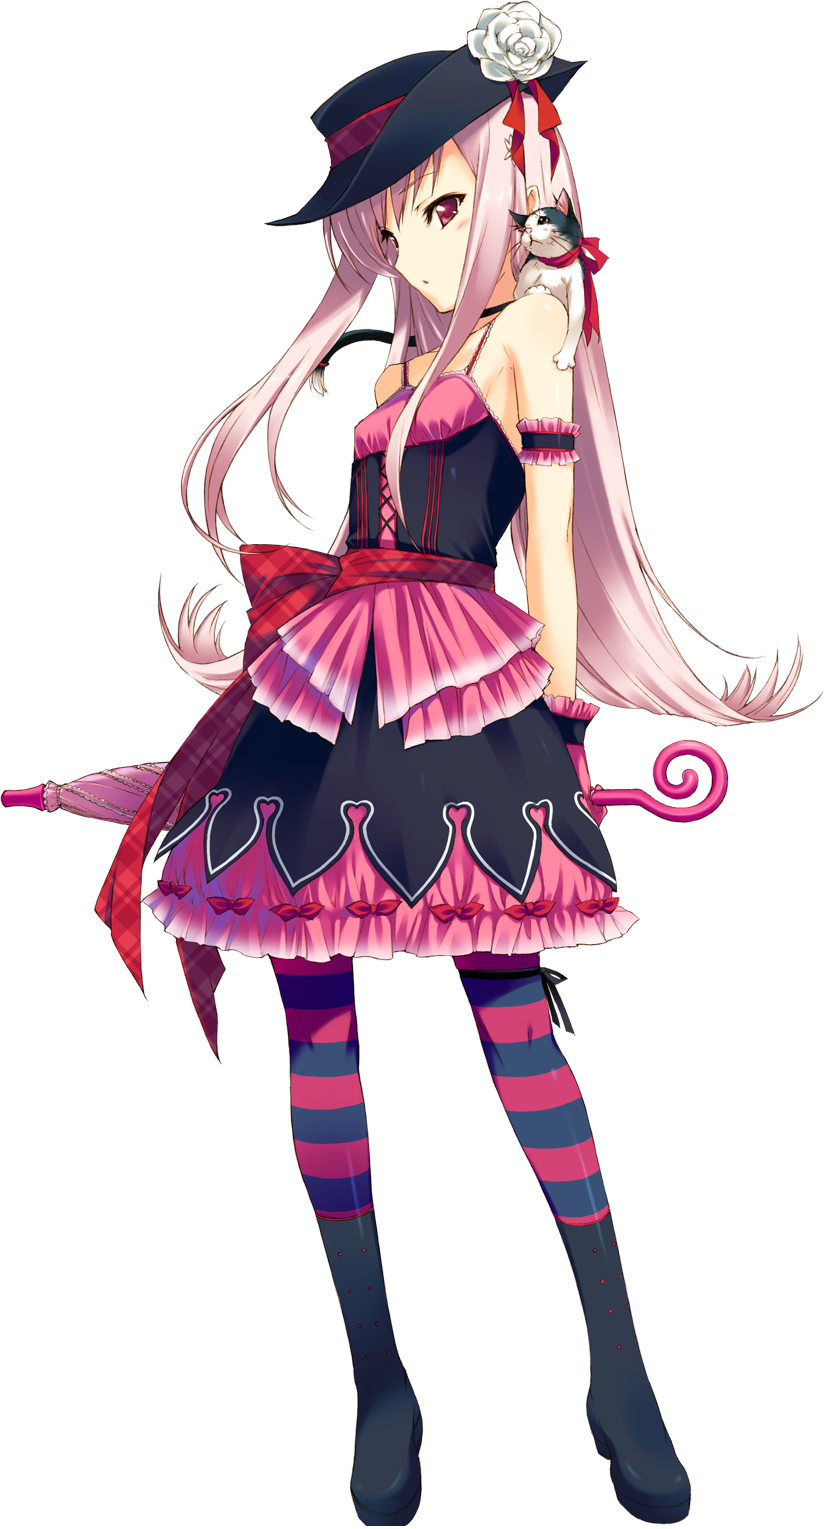 1girl animal blush boots bow bowtie breasts cat dress frills full_body gloves hat highres holding kawata_hisashi lolita_fashion long_hair looking_at_viewer lucy_maria_misora open_mouth pink_hair red_eyes small_breasts striped striped_legwear to_heart_2 to_heart_2_dungeon_travelers transparent_background umbrella